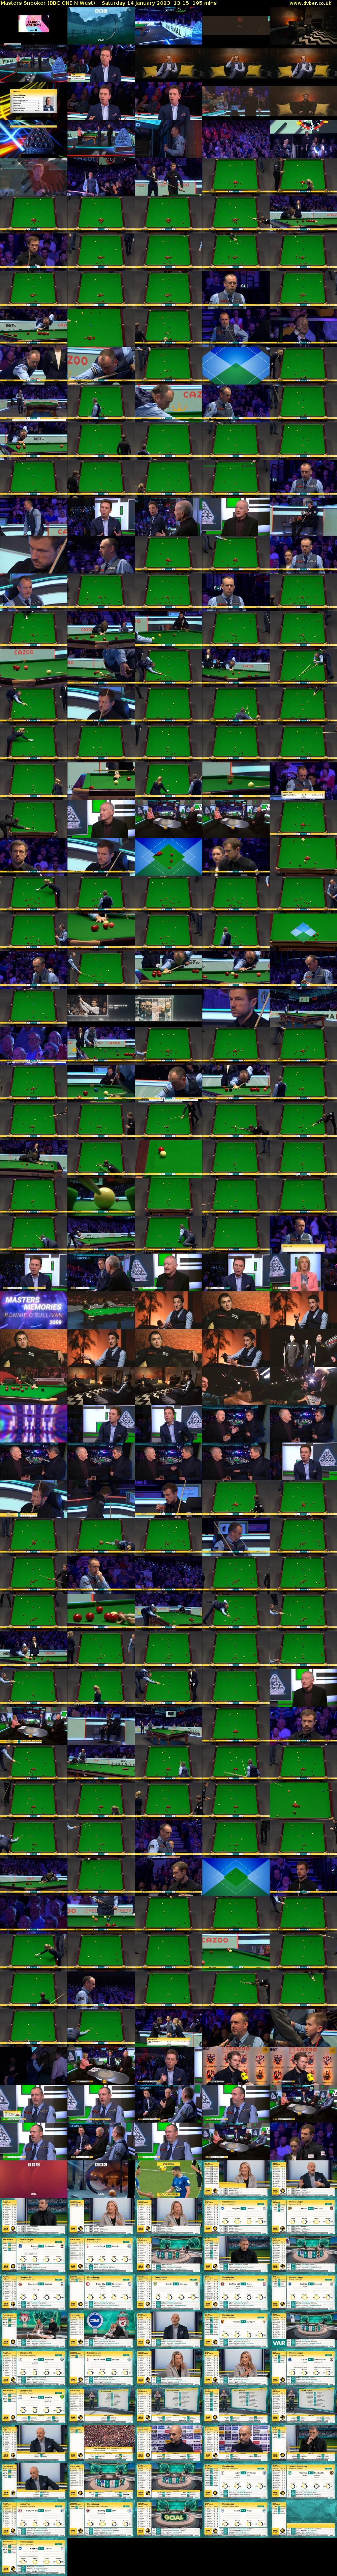 Masters Snooker (BBC ONE N West) Saturday 14 January 2023 13:15 - 16:30